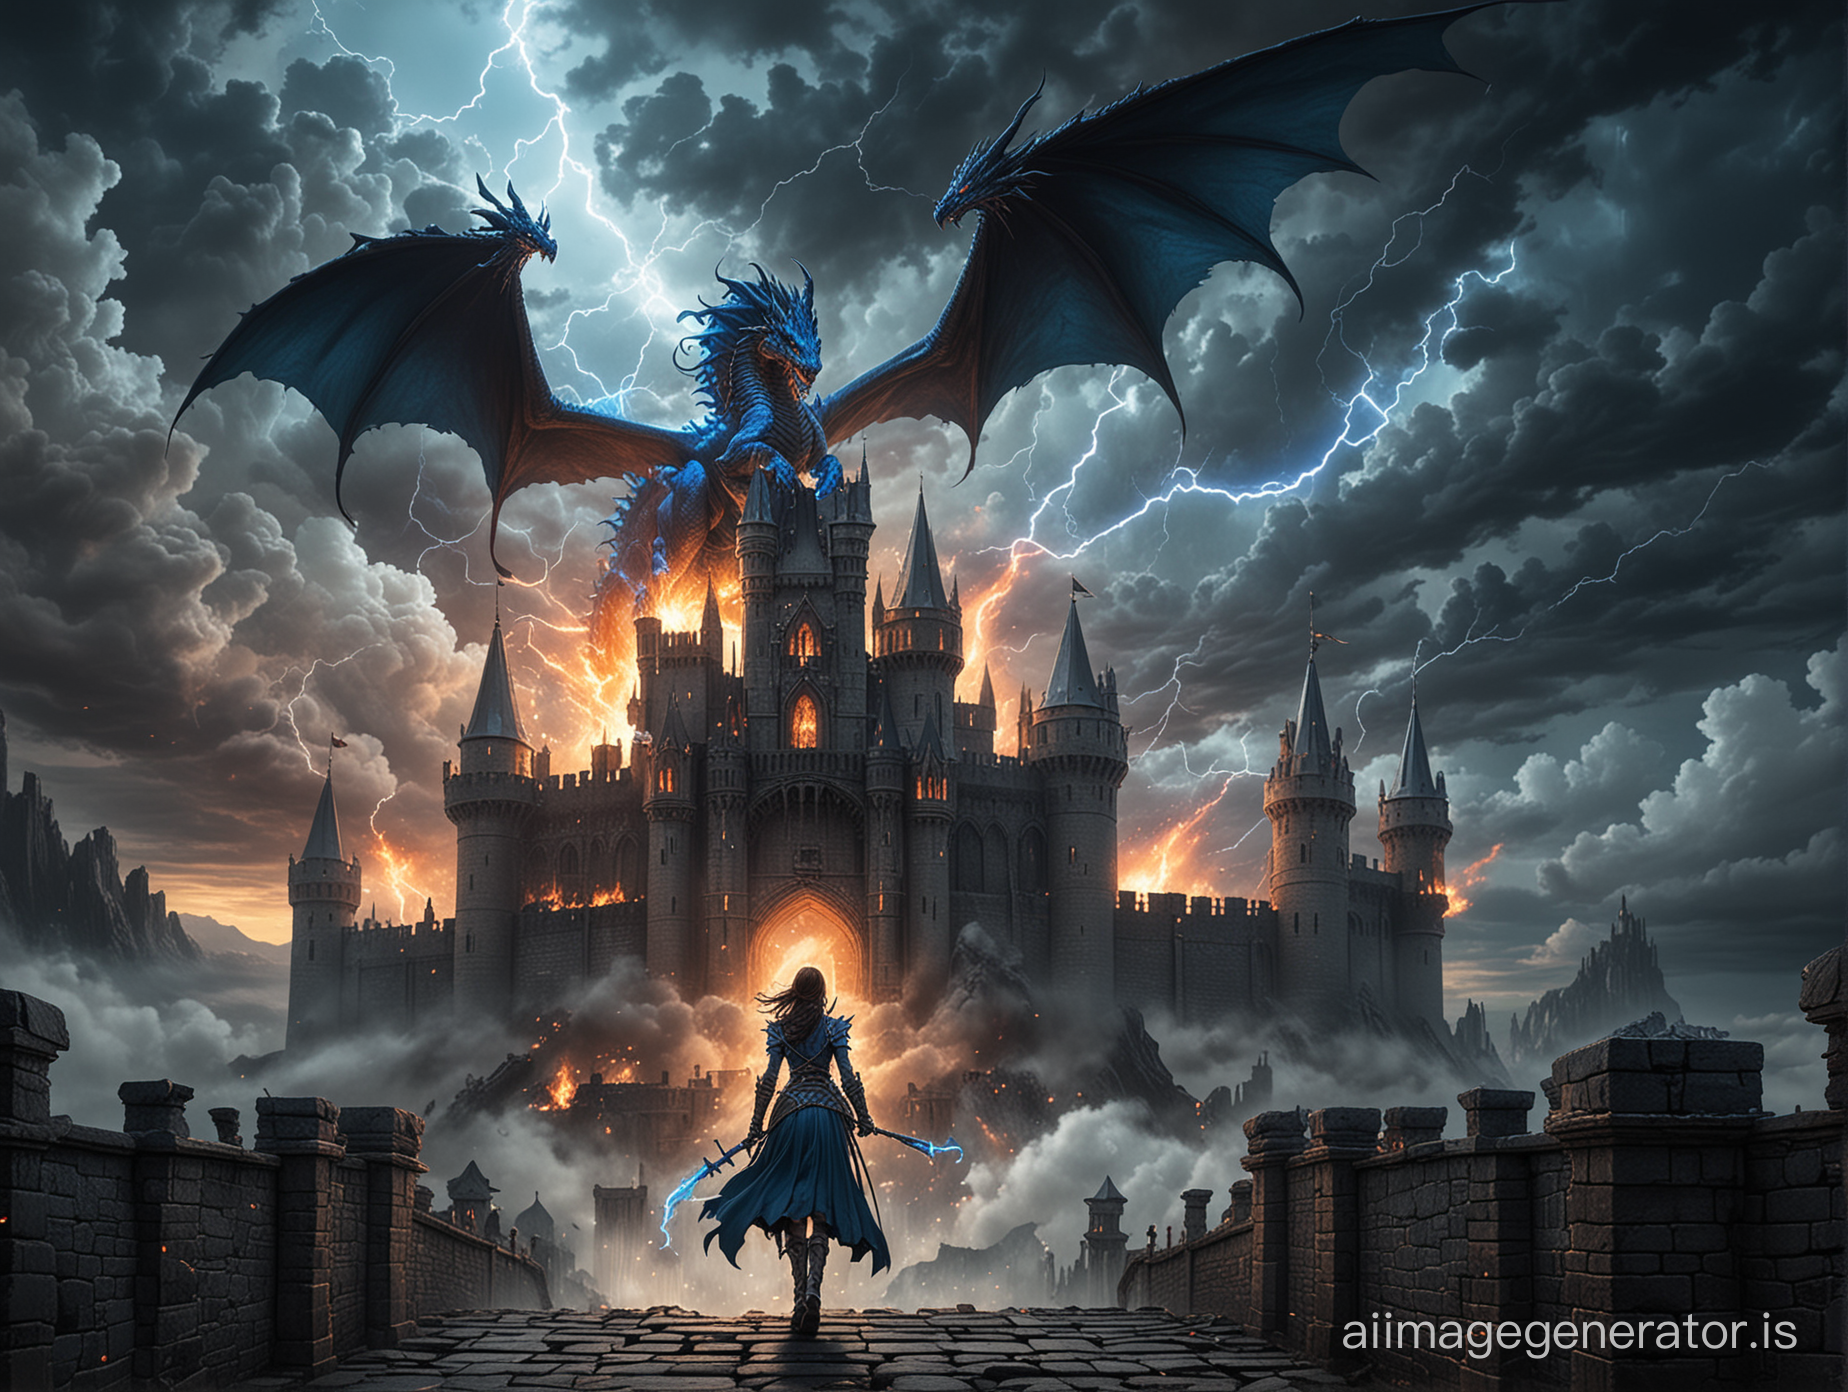 warrior woman walking away from a burning castlevania inspired castle with storm clouds and a winged blue dragon perched on parapet breathing lightning